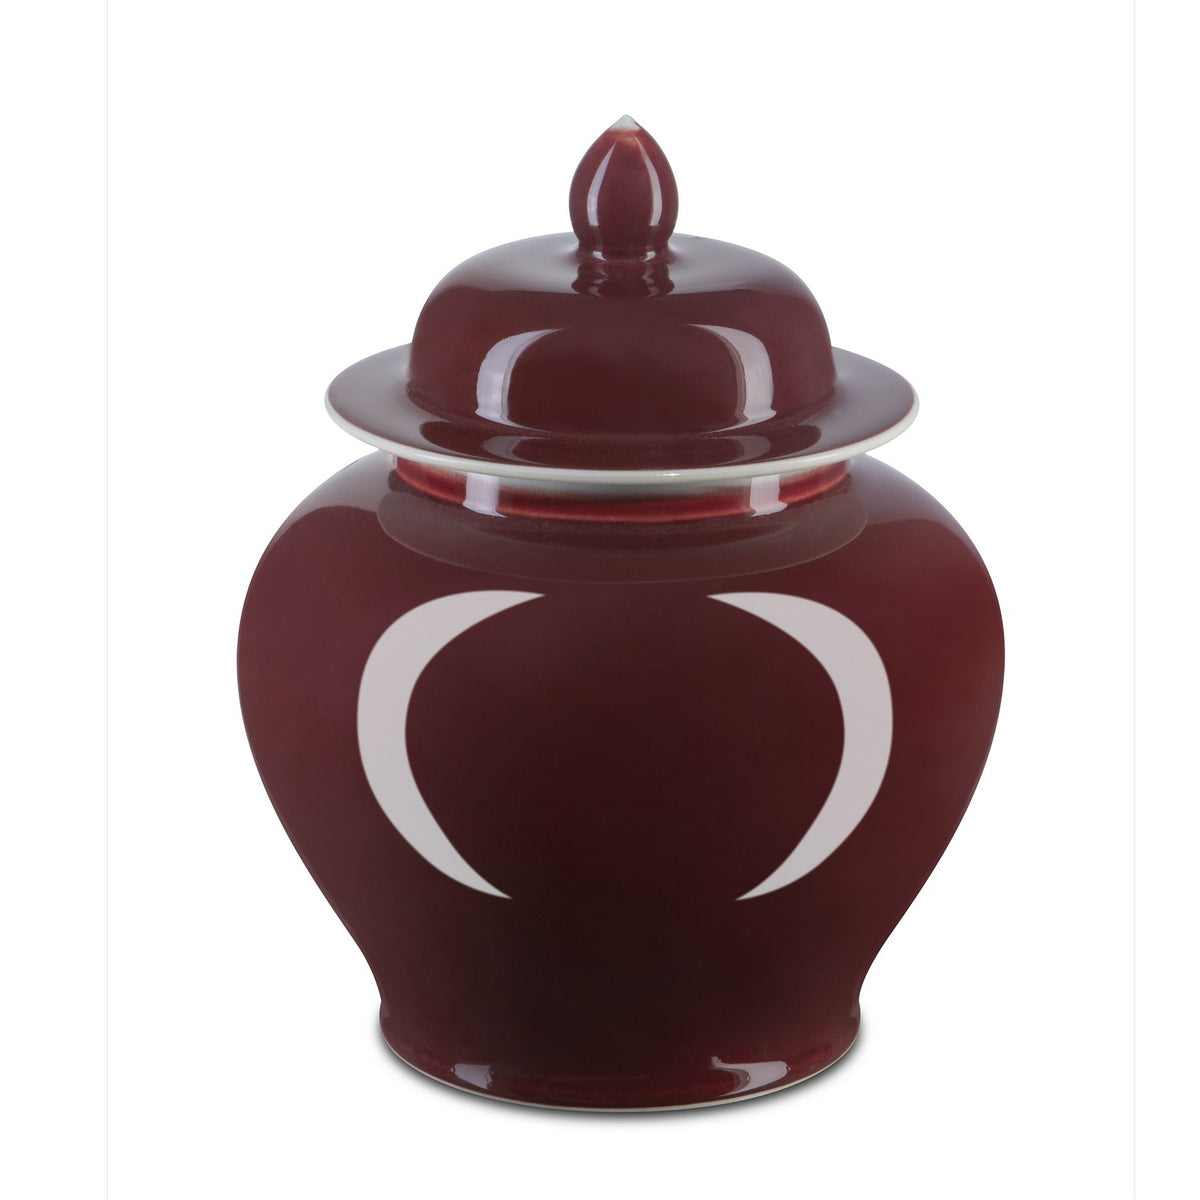 Currey and Company - 1200-0684 - Jar - Oxblood - Imperial Red